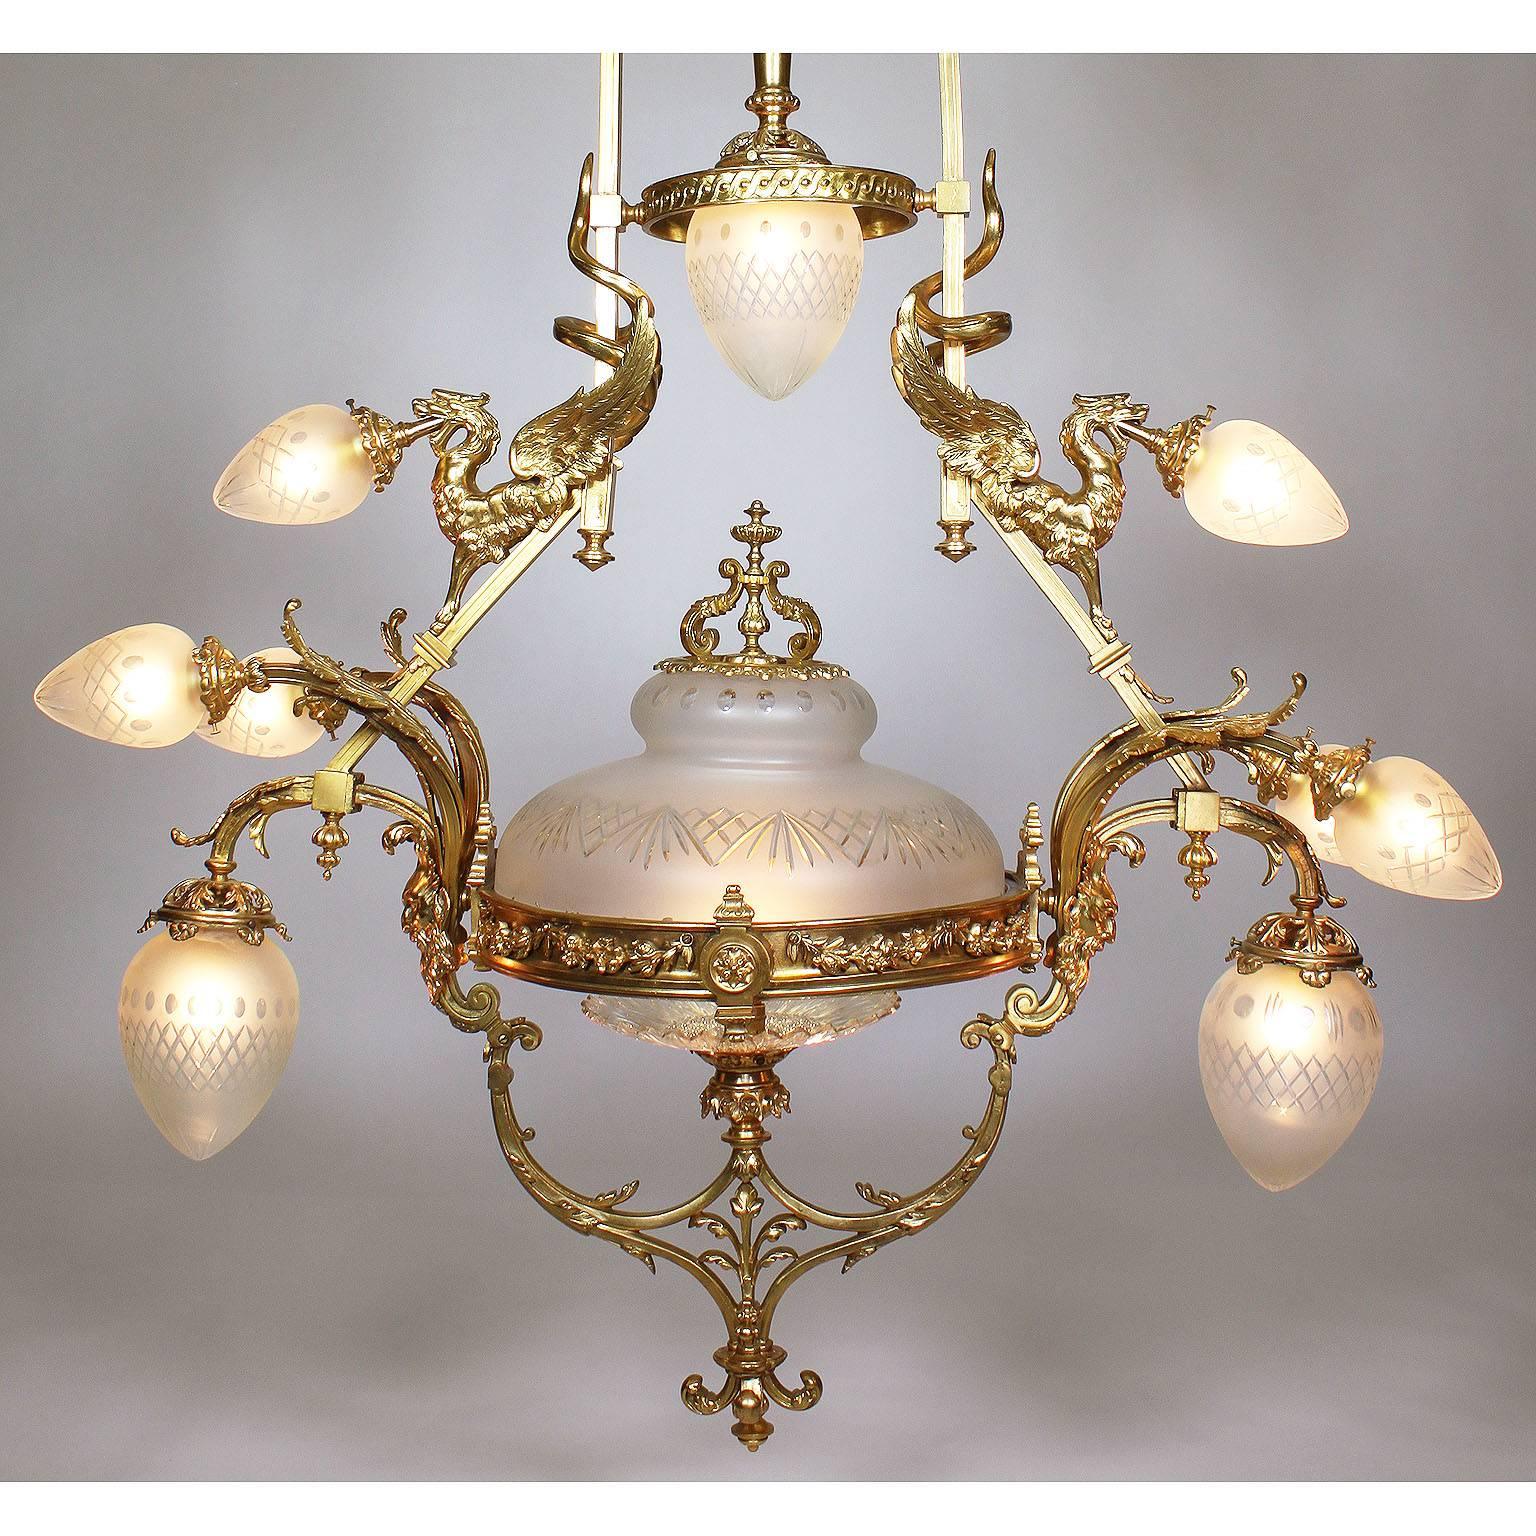 A very fine and rare French Belle Époque 19th-20th century neoclassical revival style gilt bronze and frosted and cut-glass 